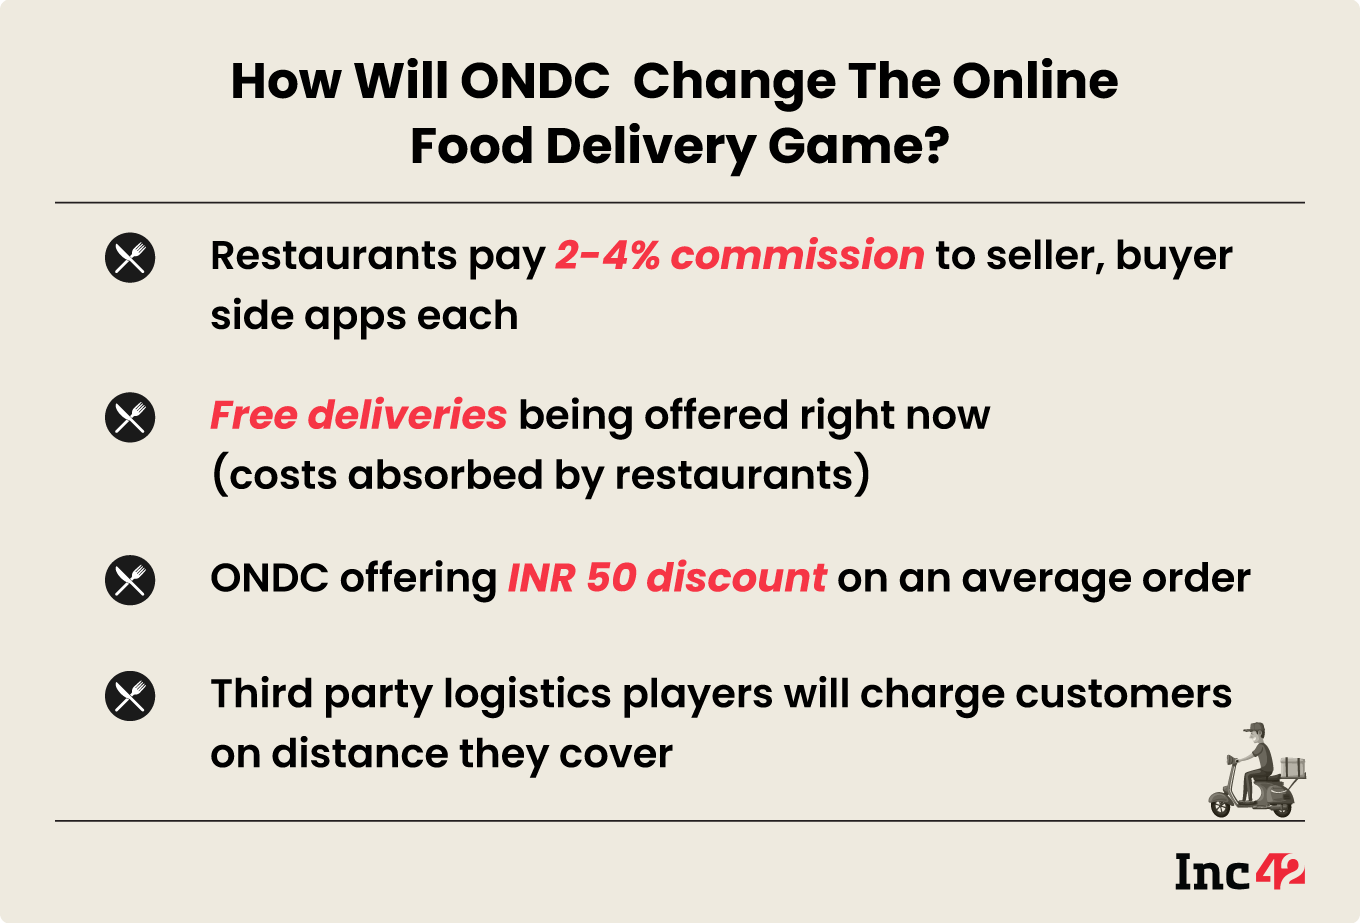 How will ONDC change the online food delivery game